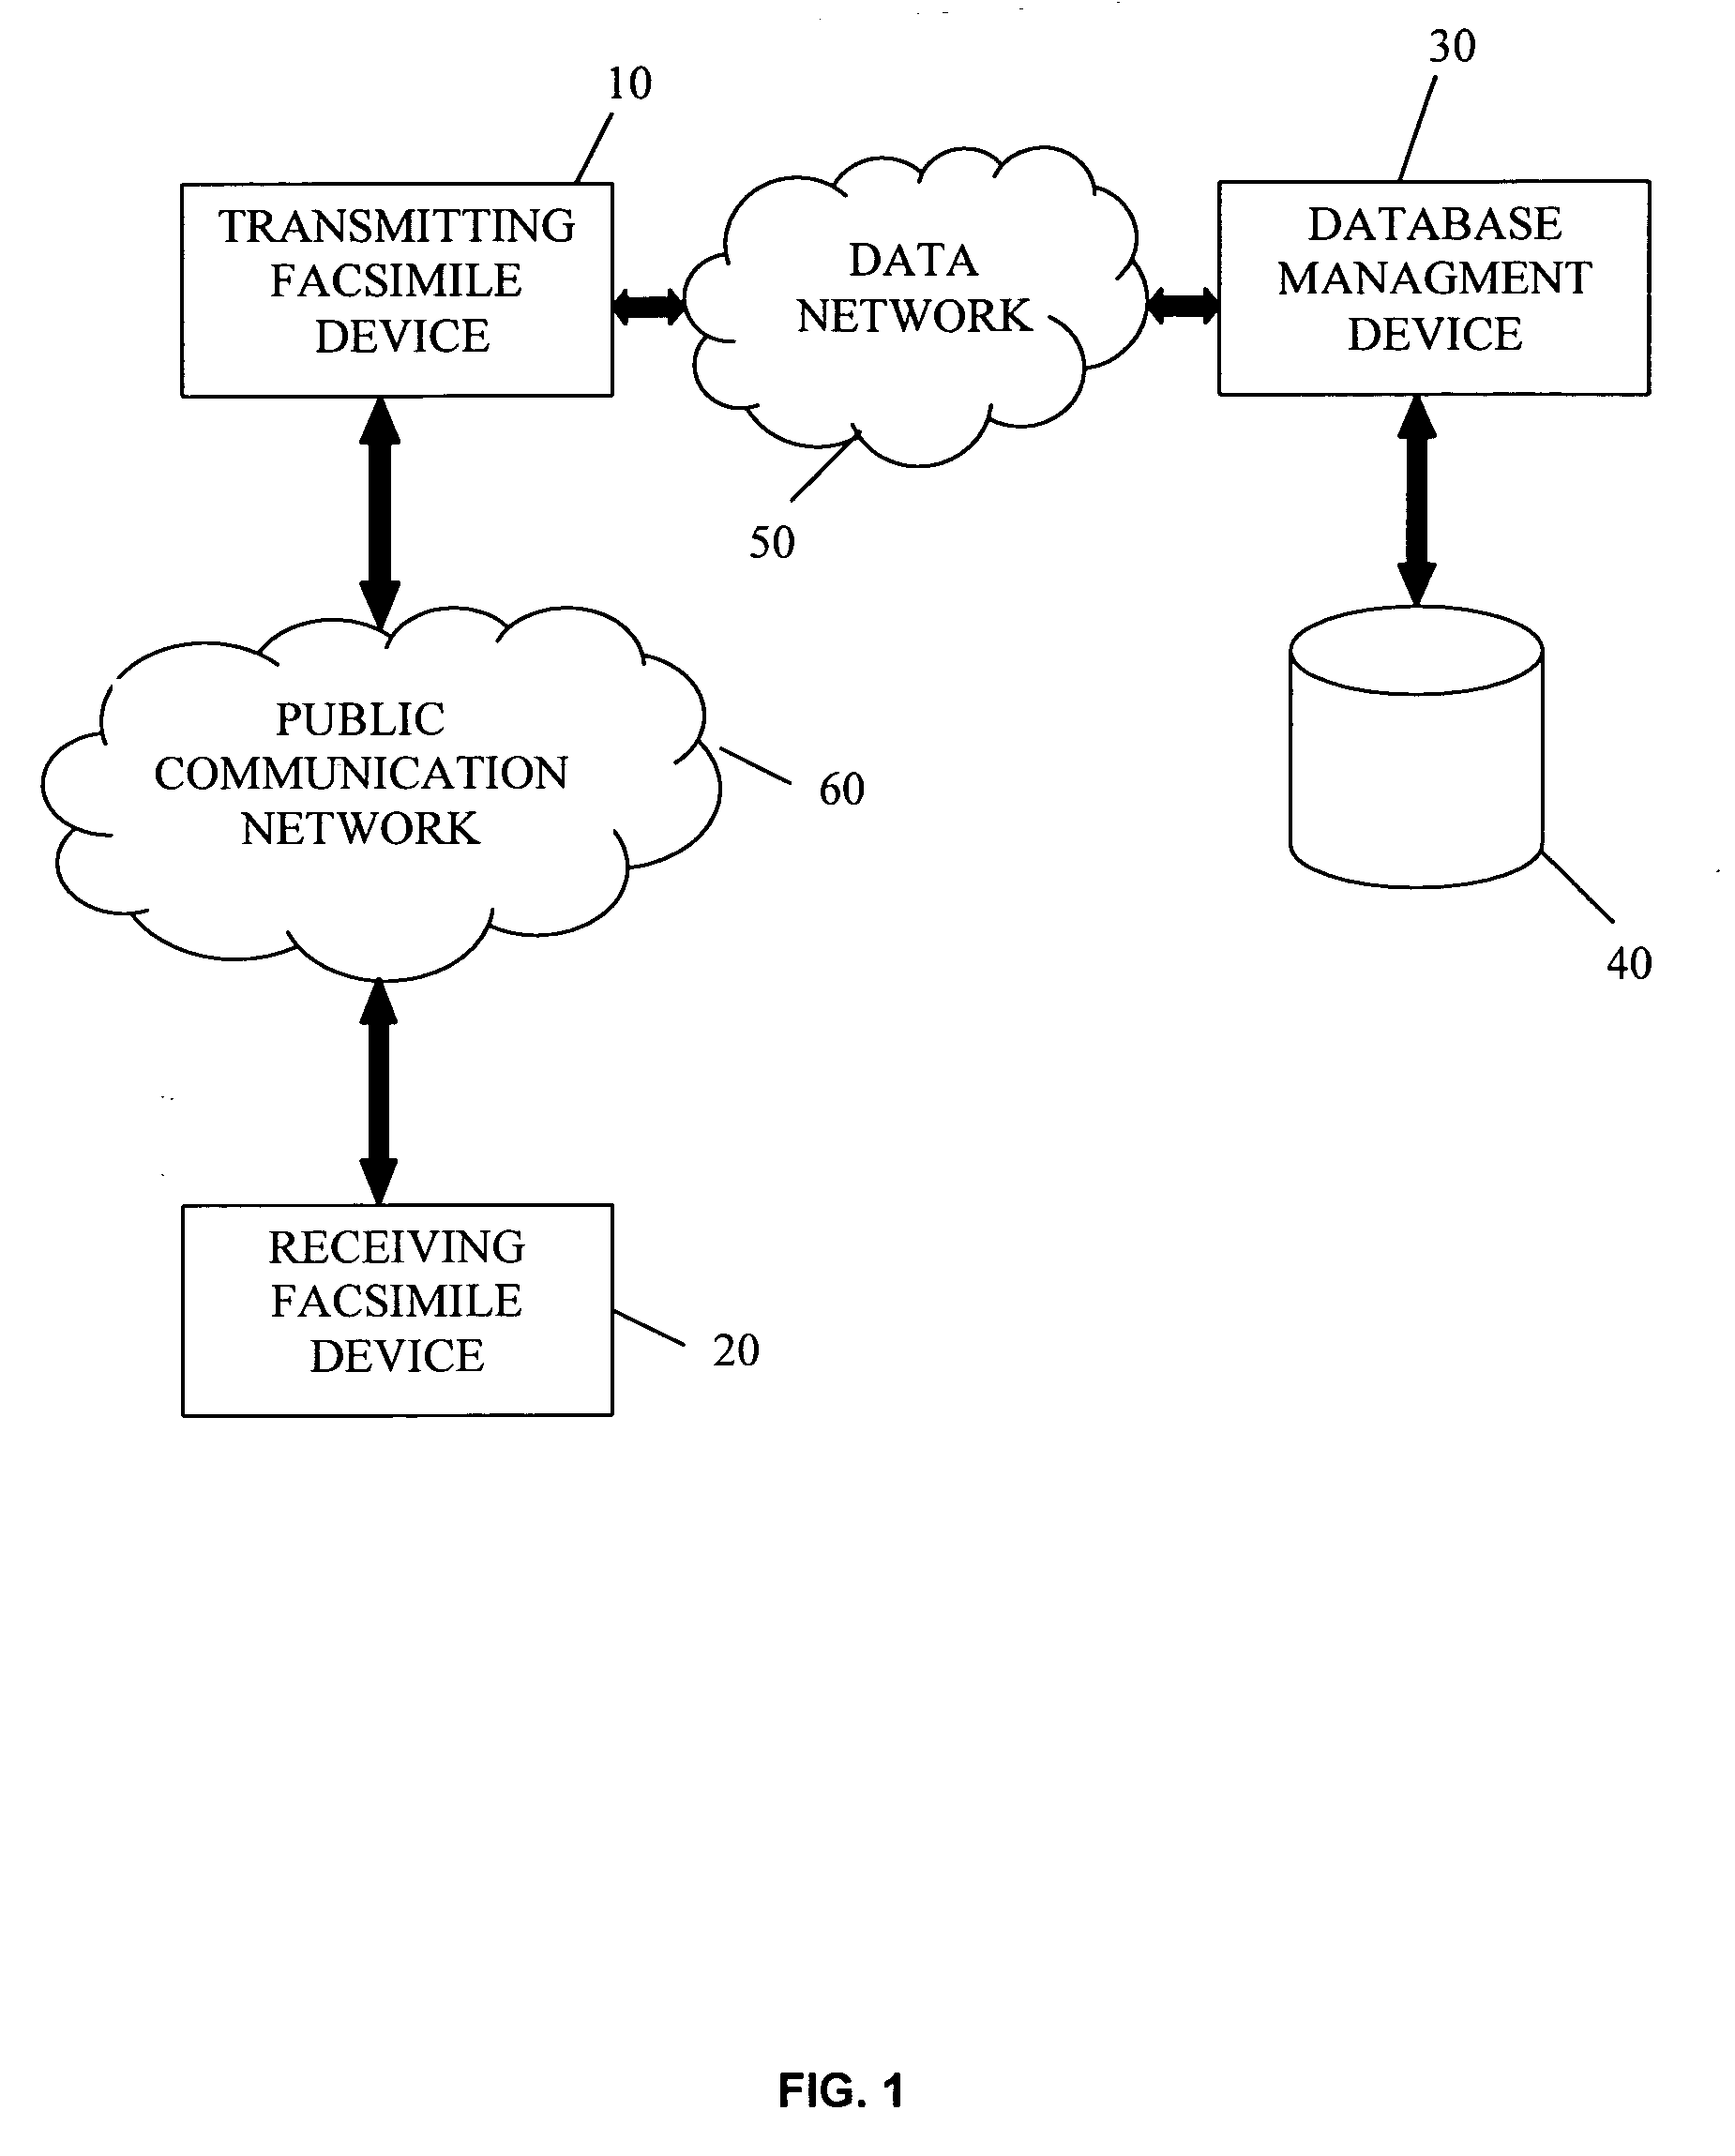 Systems and methods for determining user preferences and/or facsimile device capabilities before call initiation